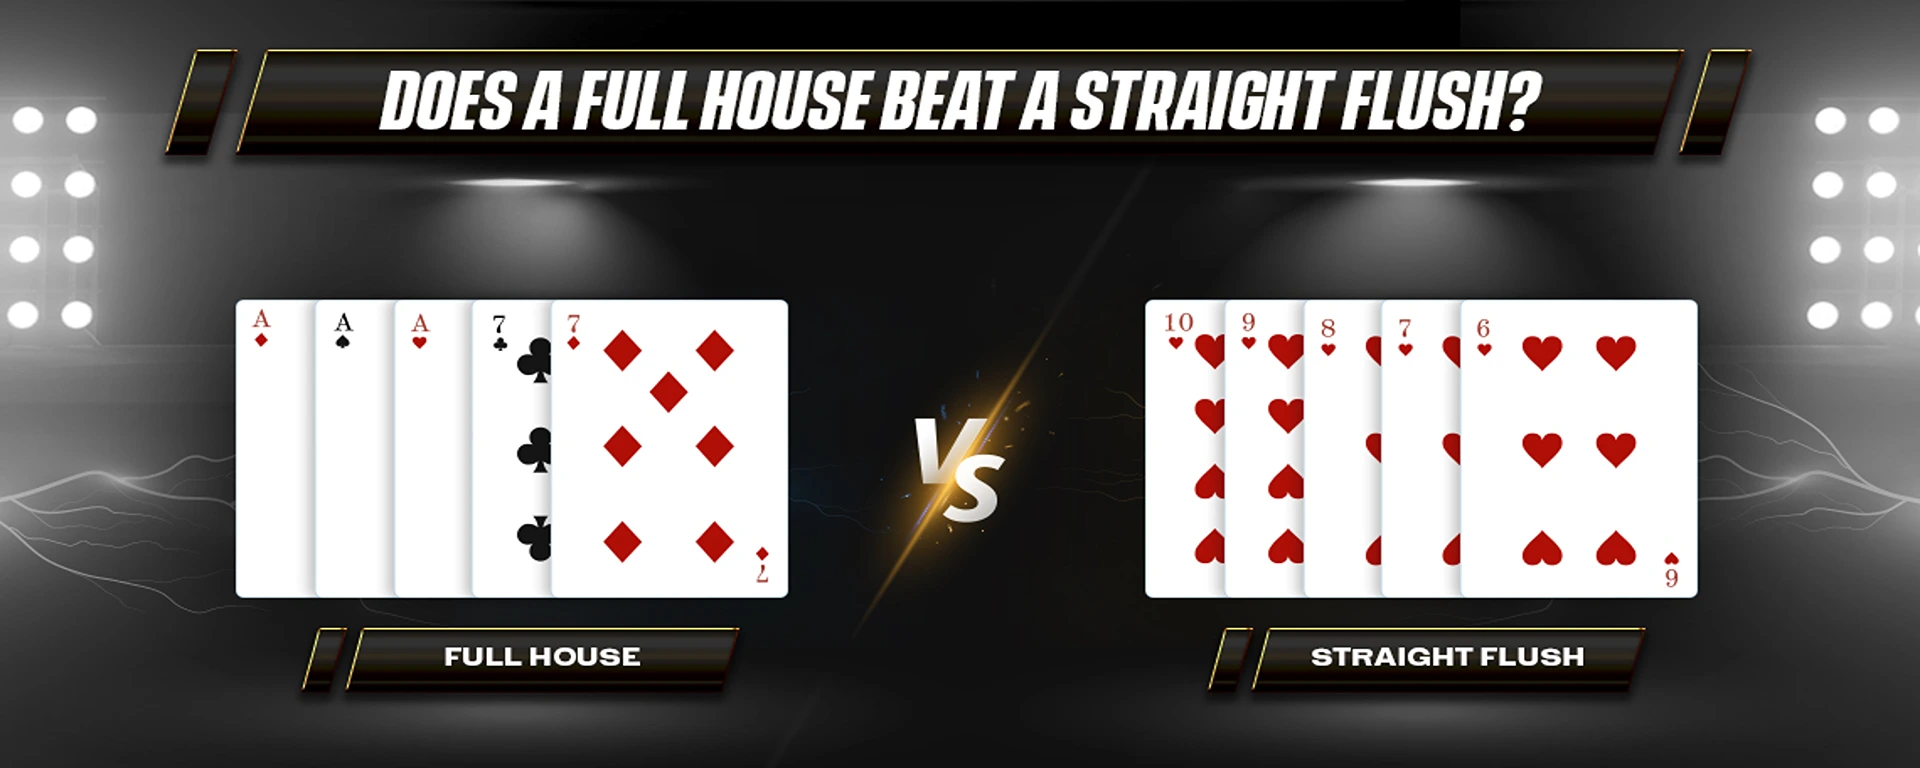 Does a Full House Beat a Straight Flush in Poker?